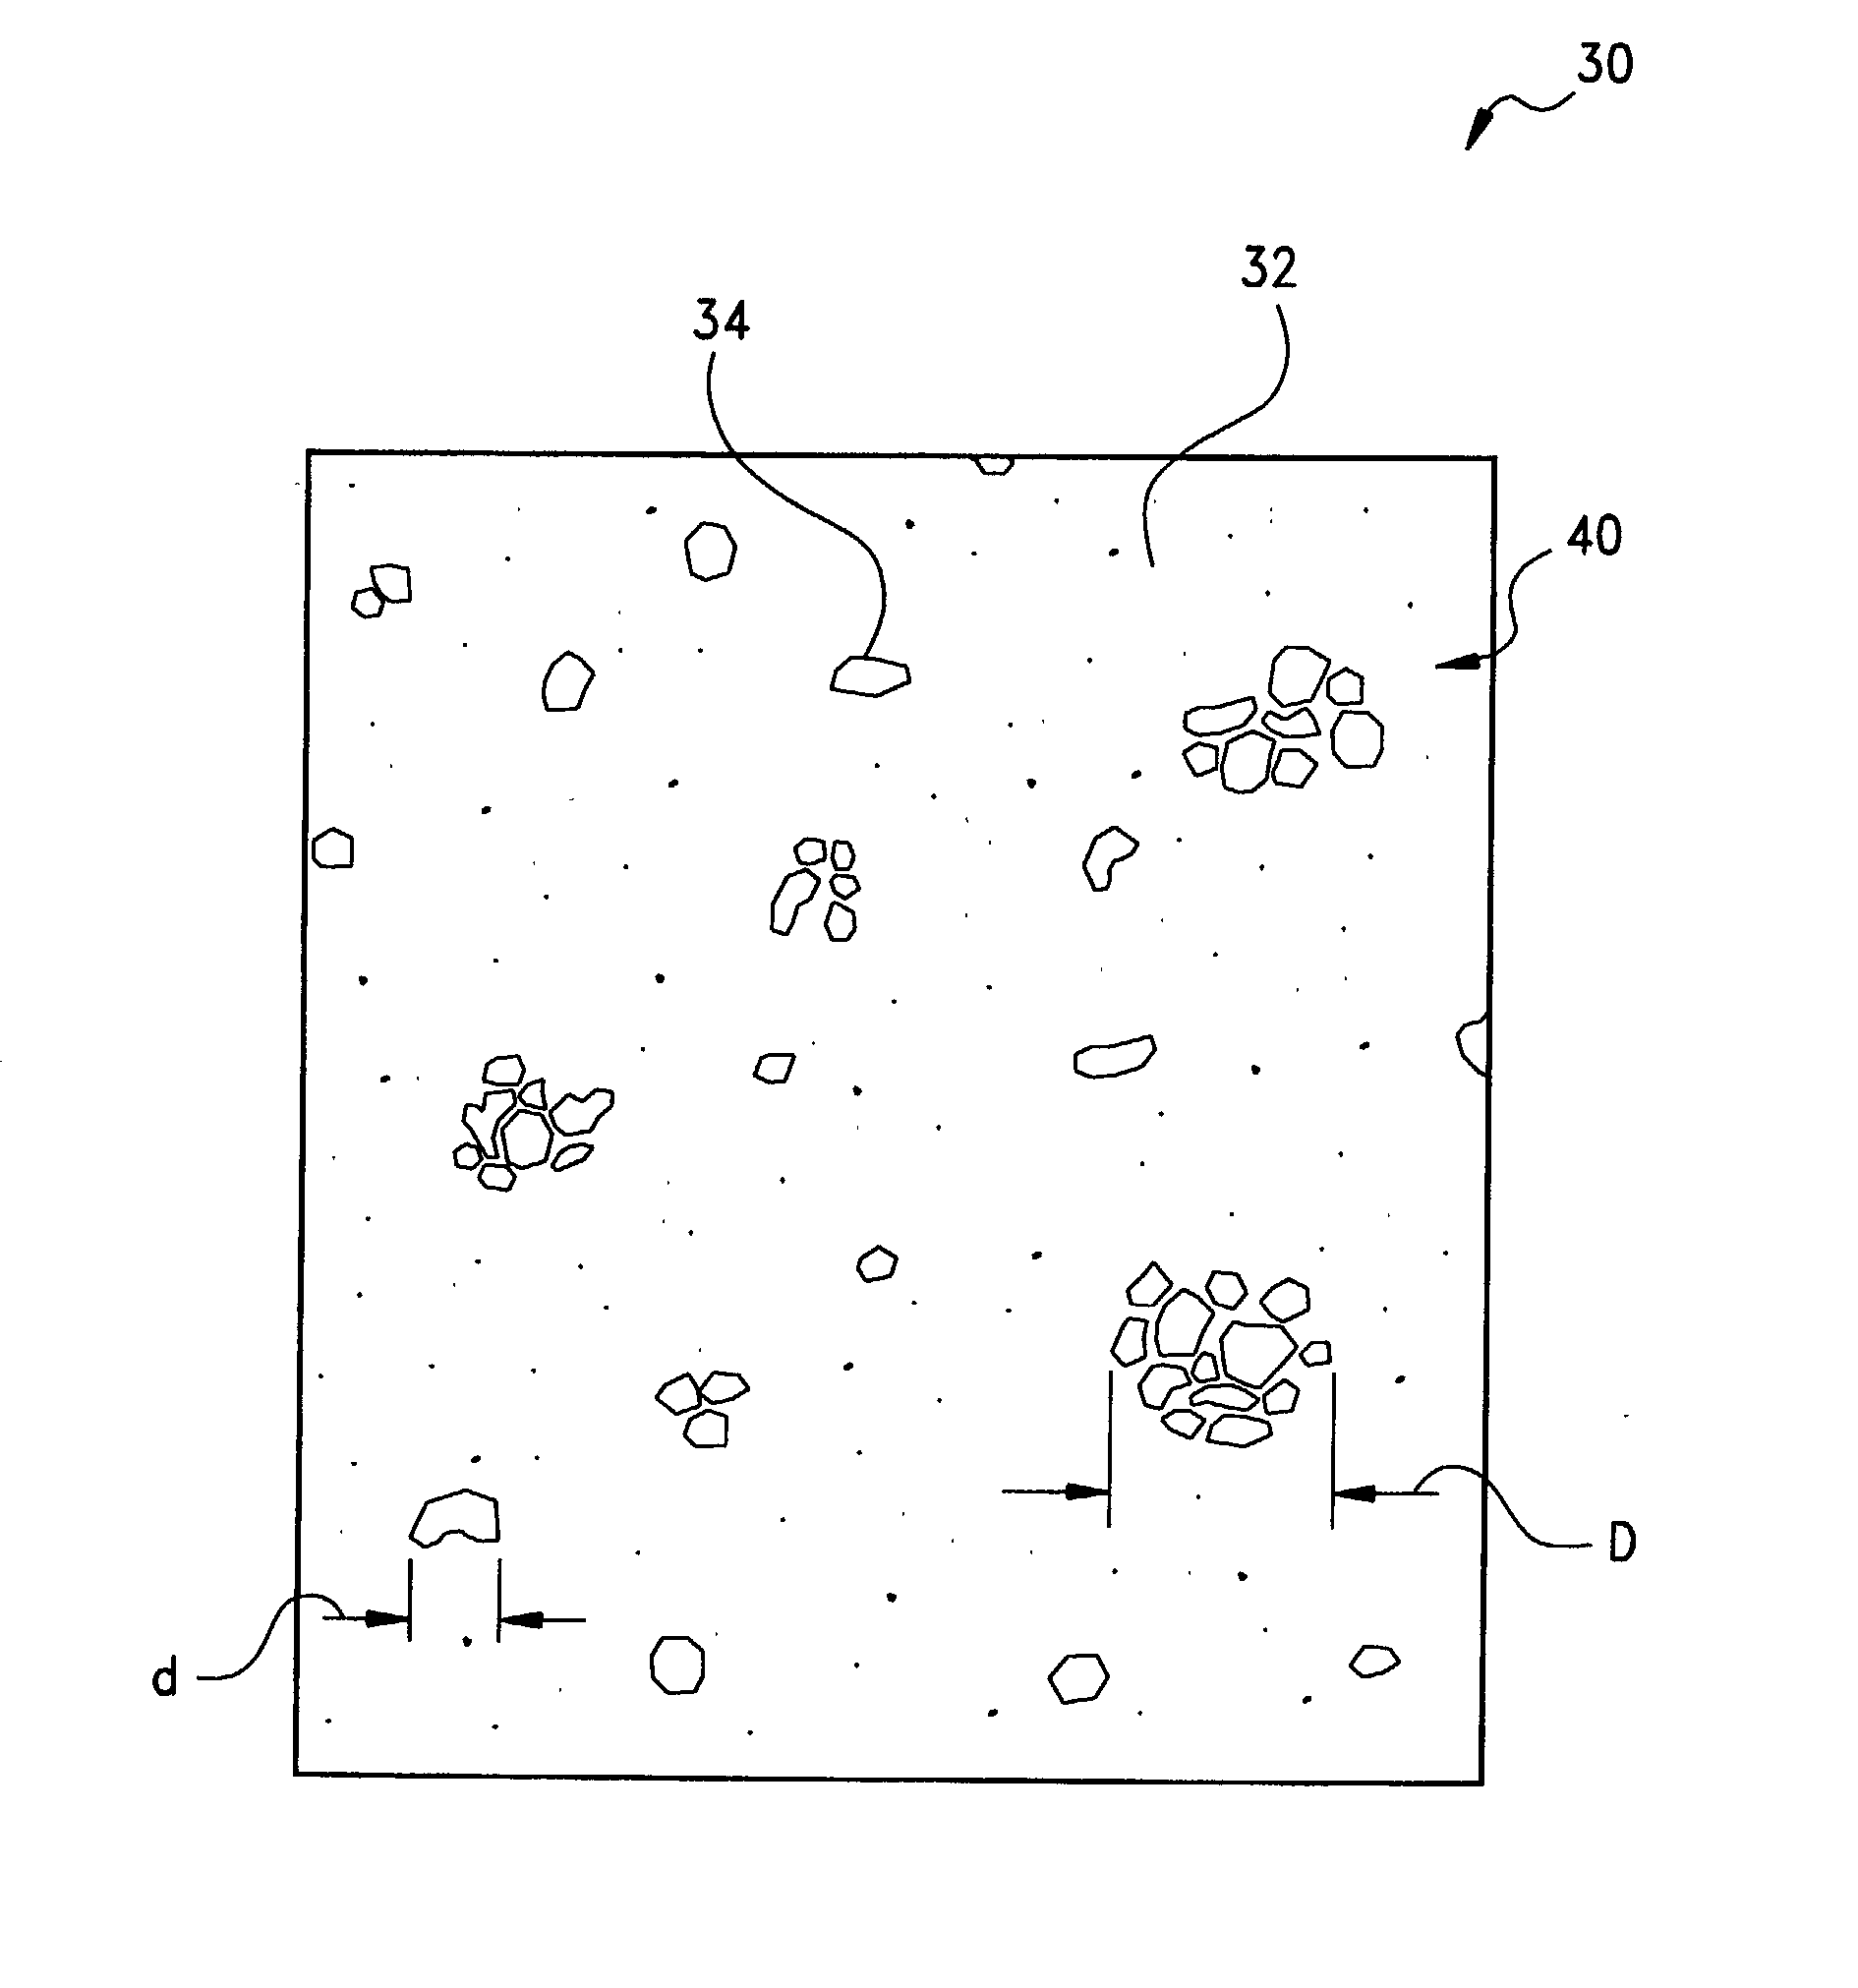 Thermal management materials having a phase change dispersion